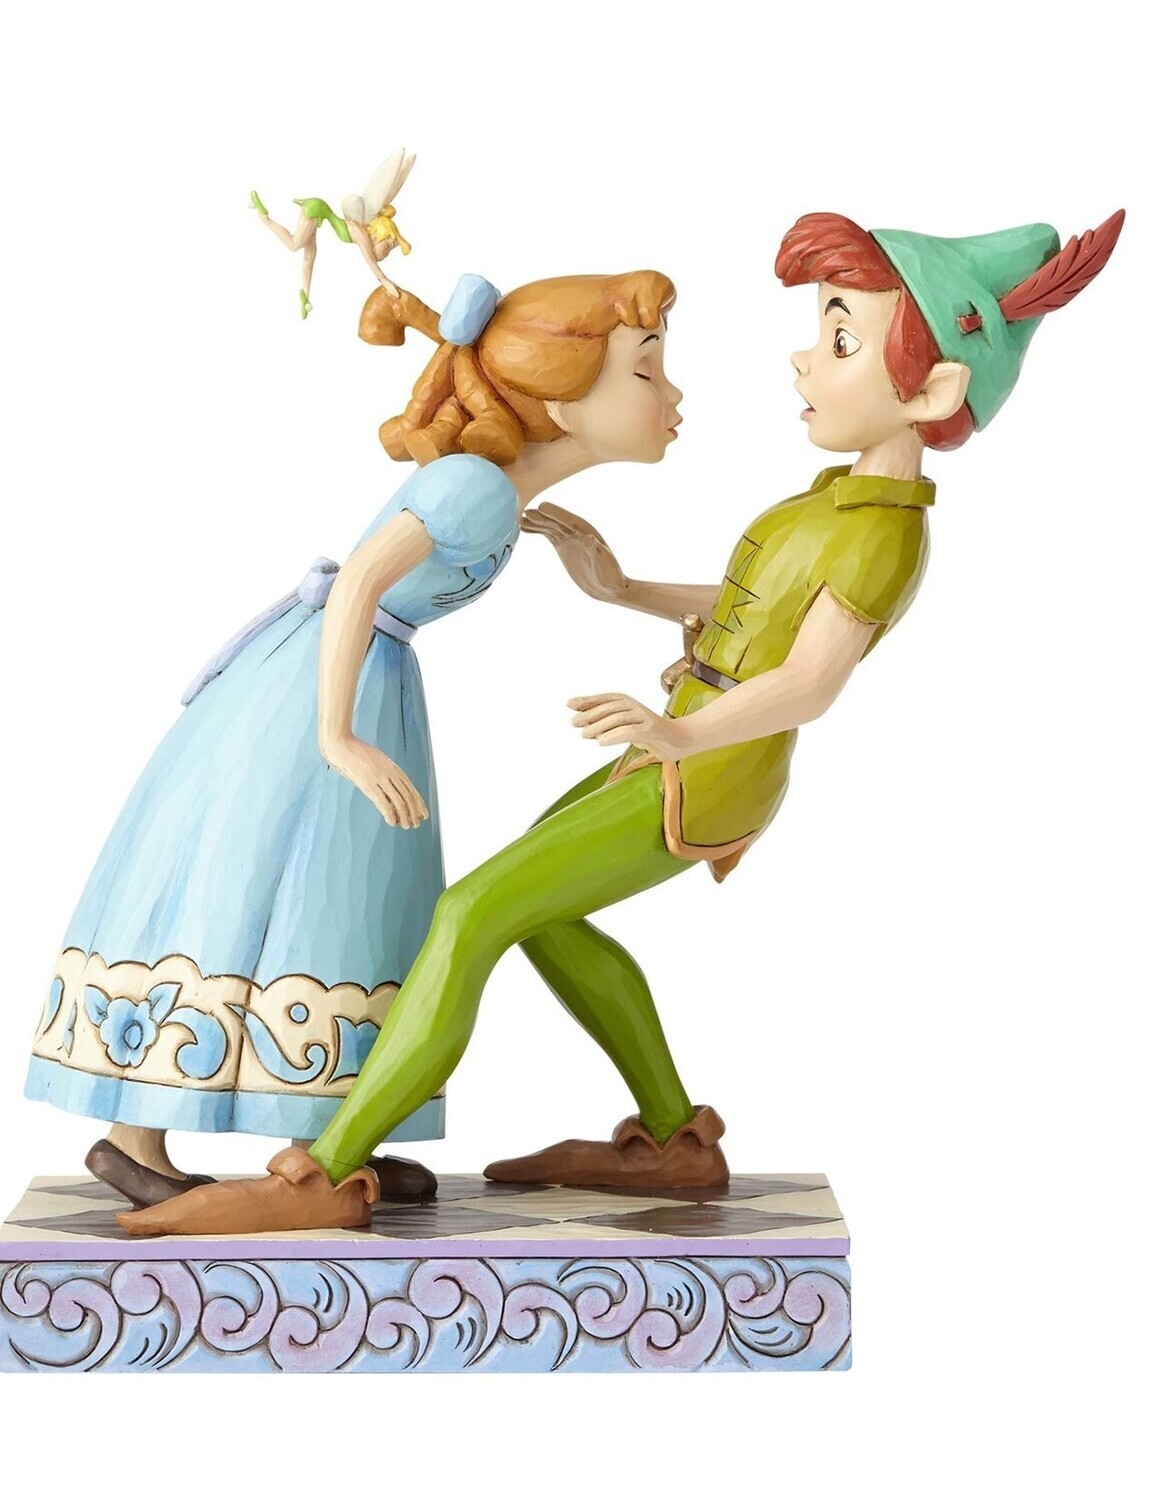 Jim Shore Disney Traditions "An unexpected Kiss" Peter Pan & Wendy 65th Anniversary Piece
(4059725)